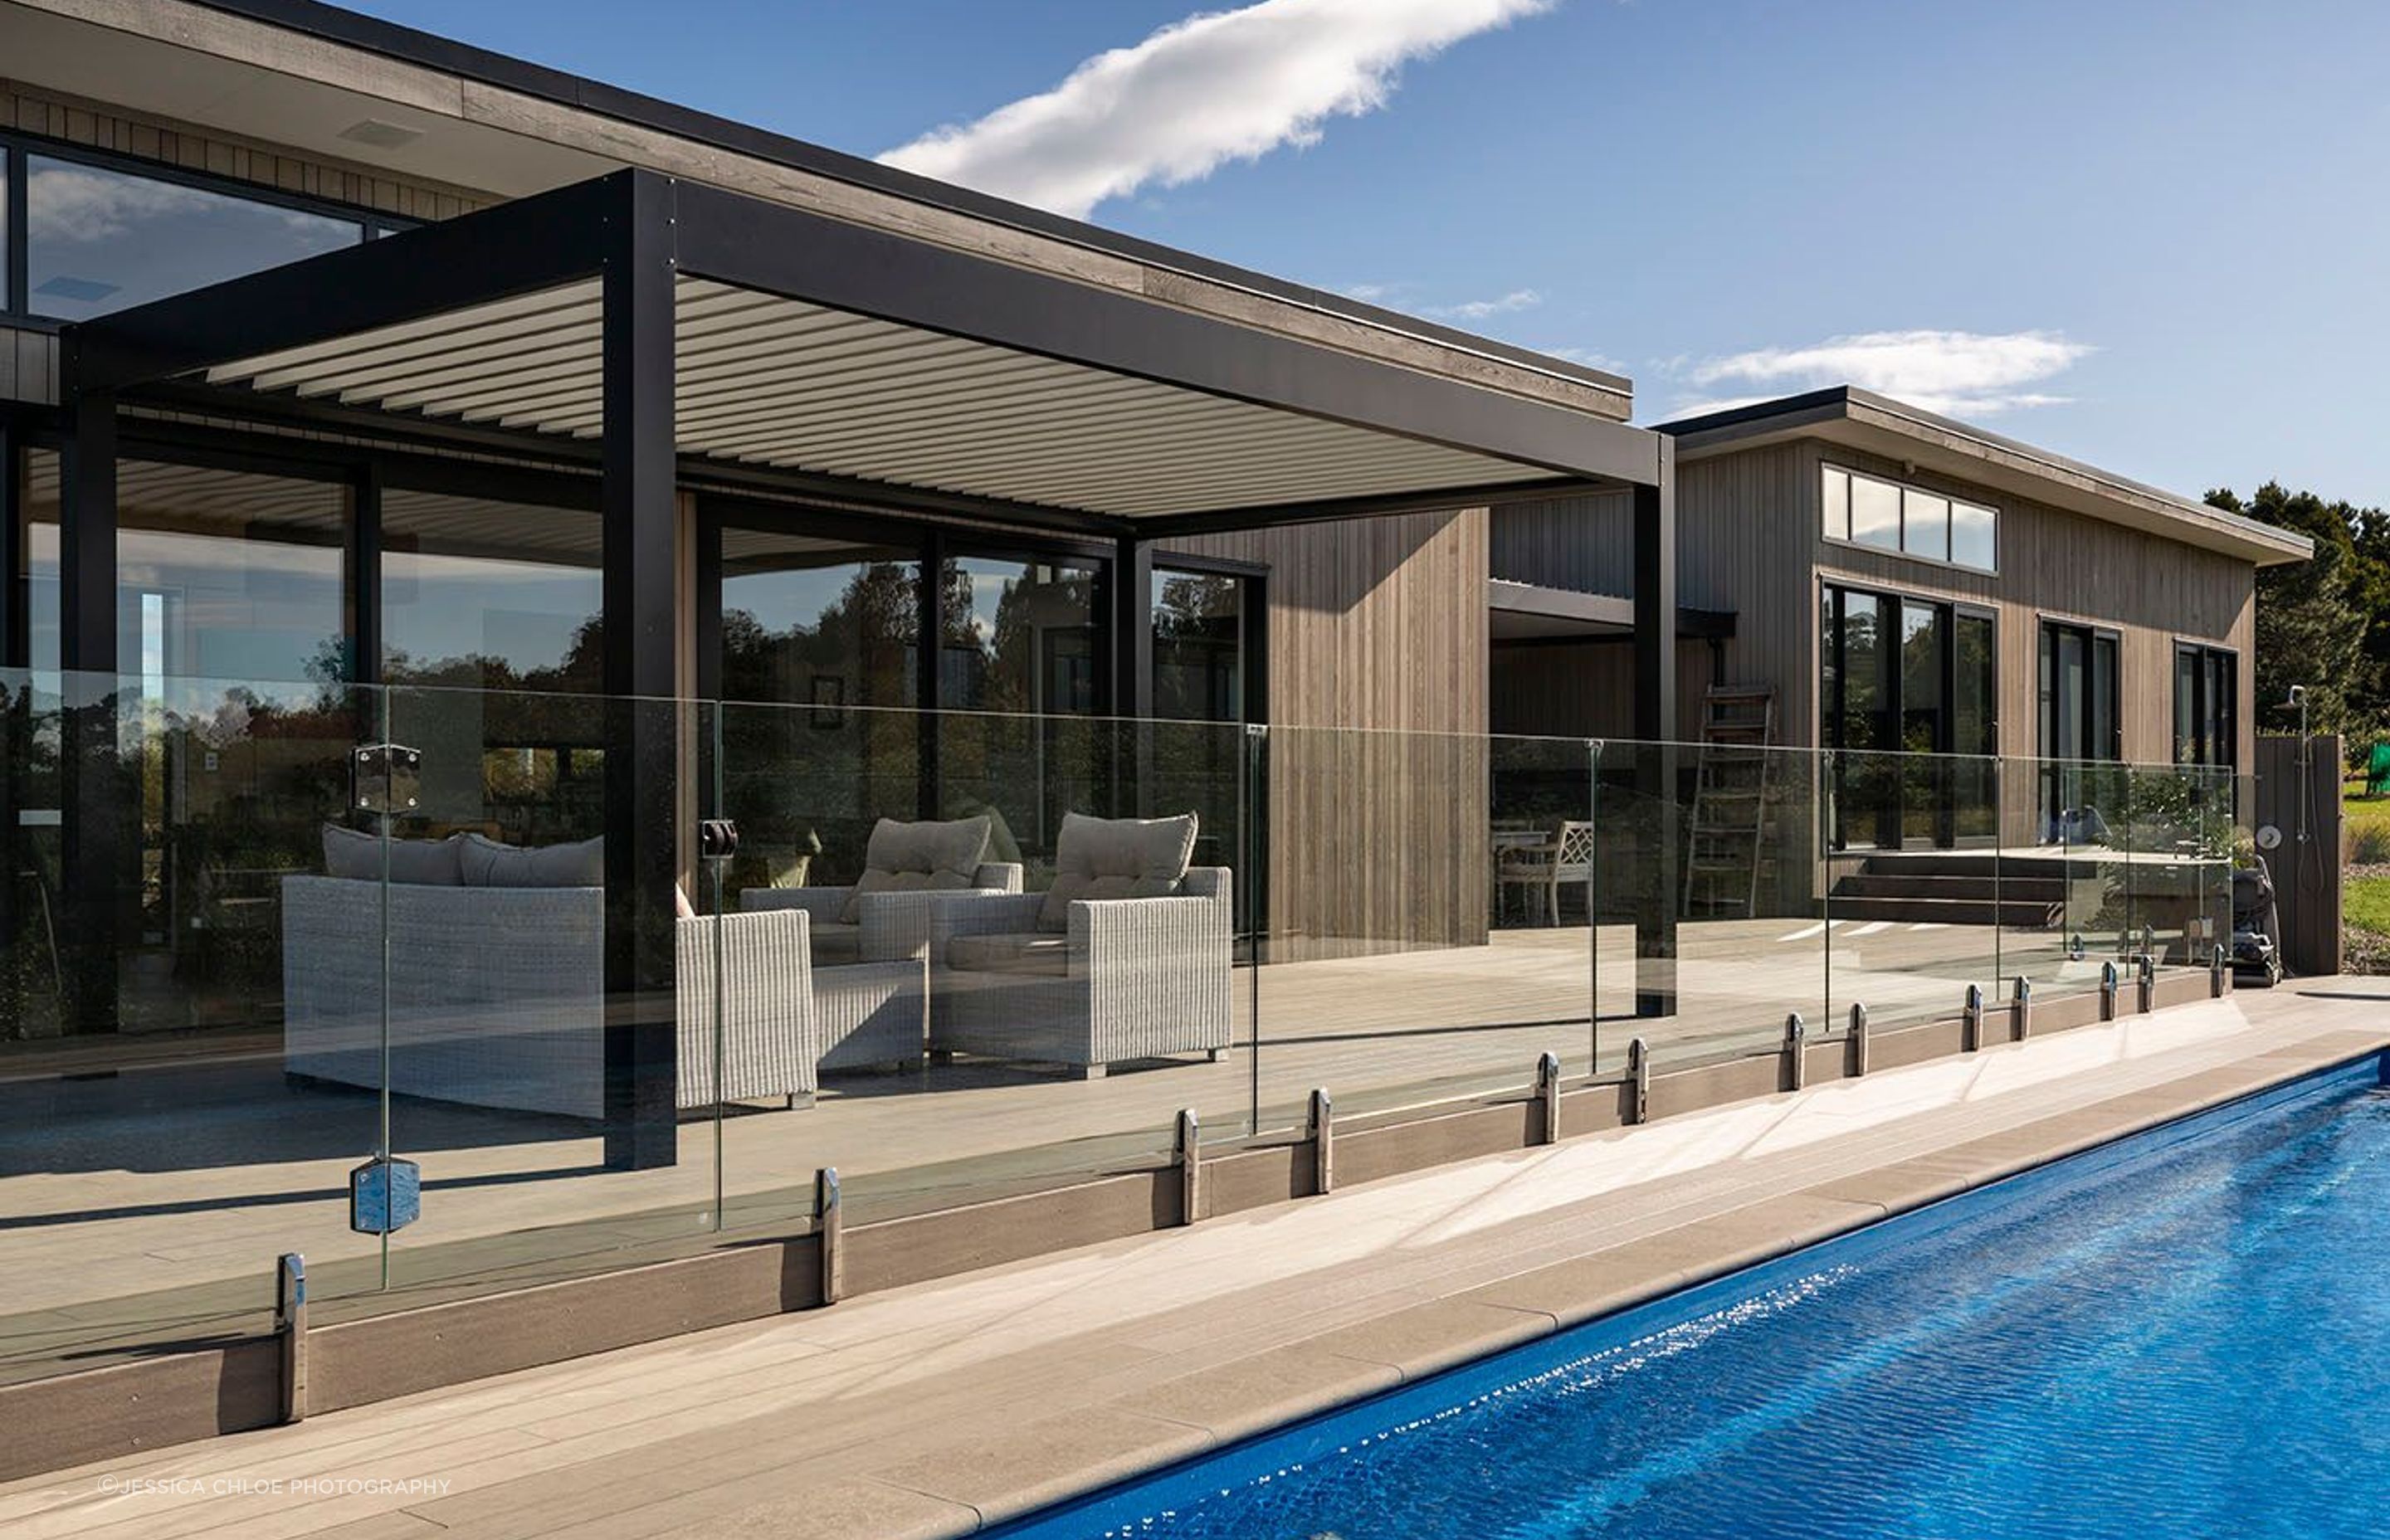 Pool area creates a heroic glimpse of the building and its clean lines